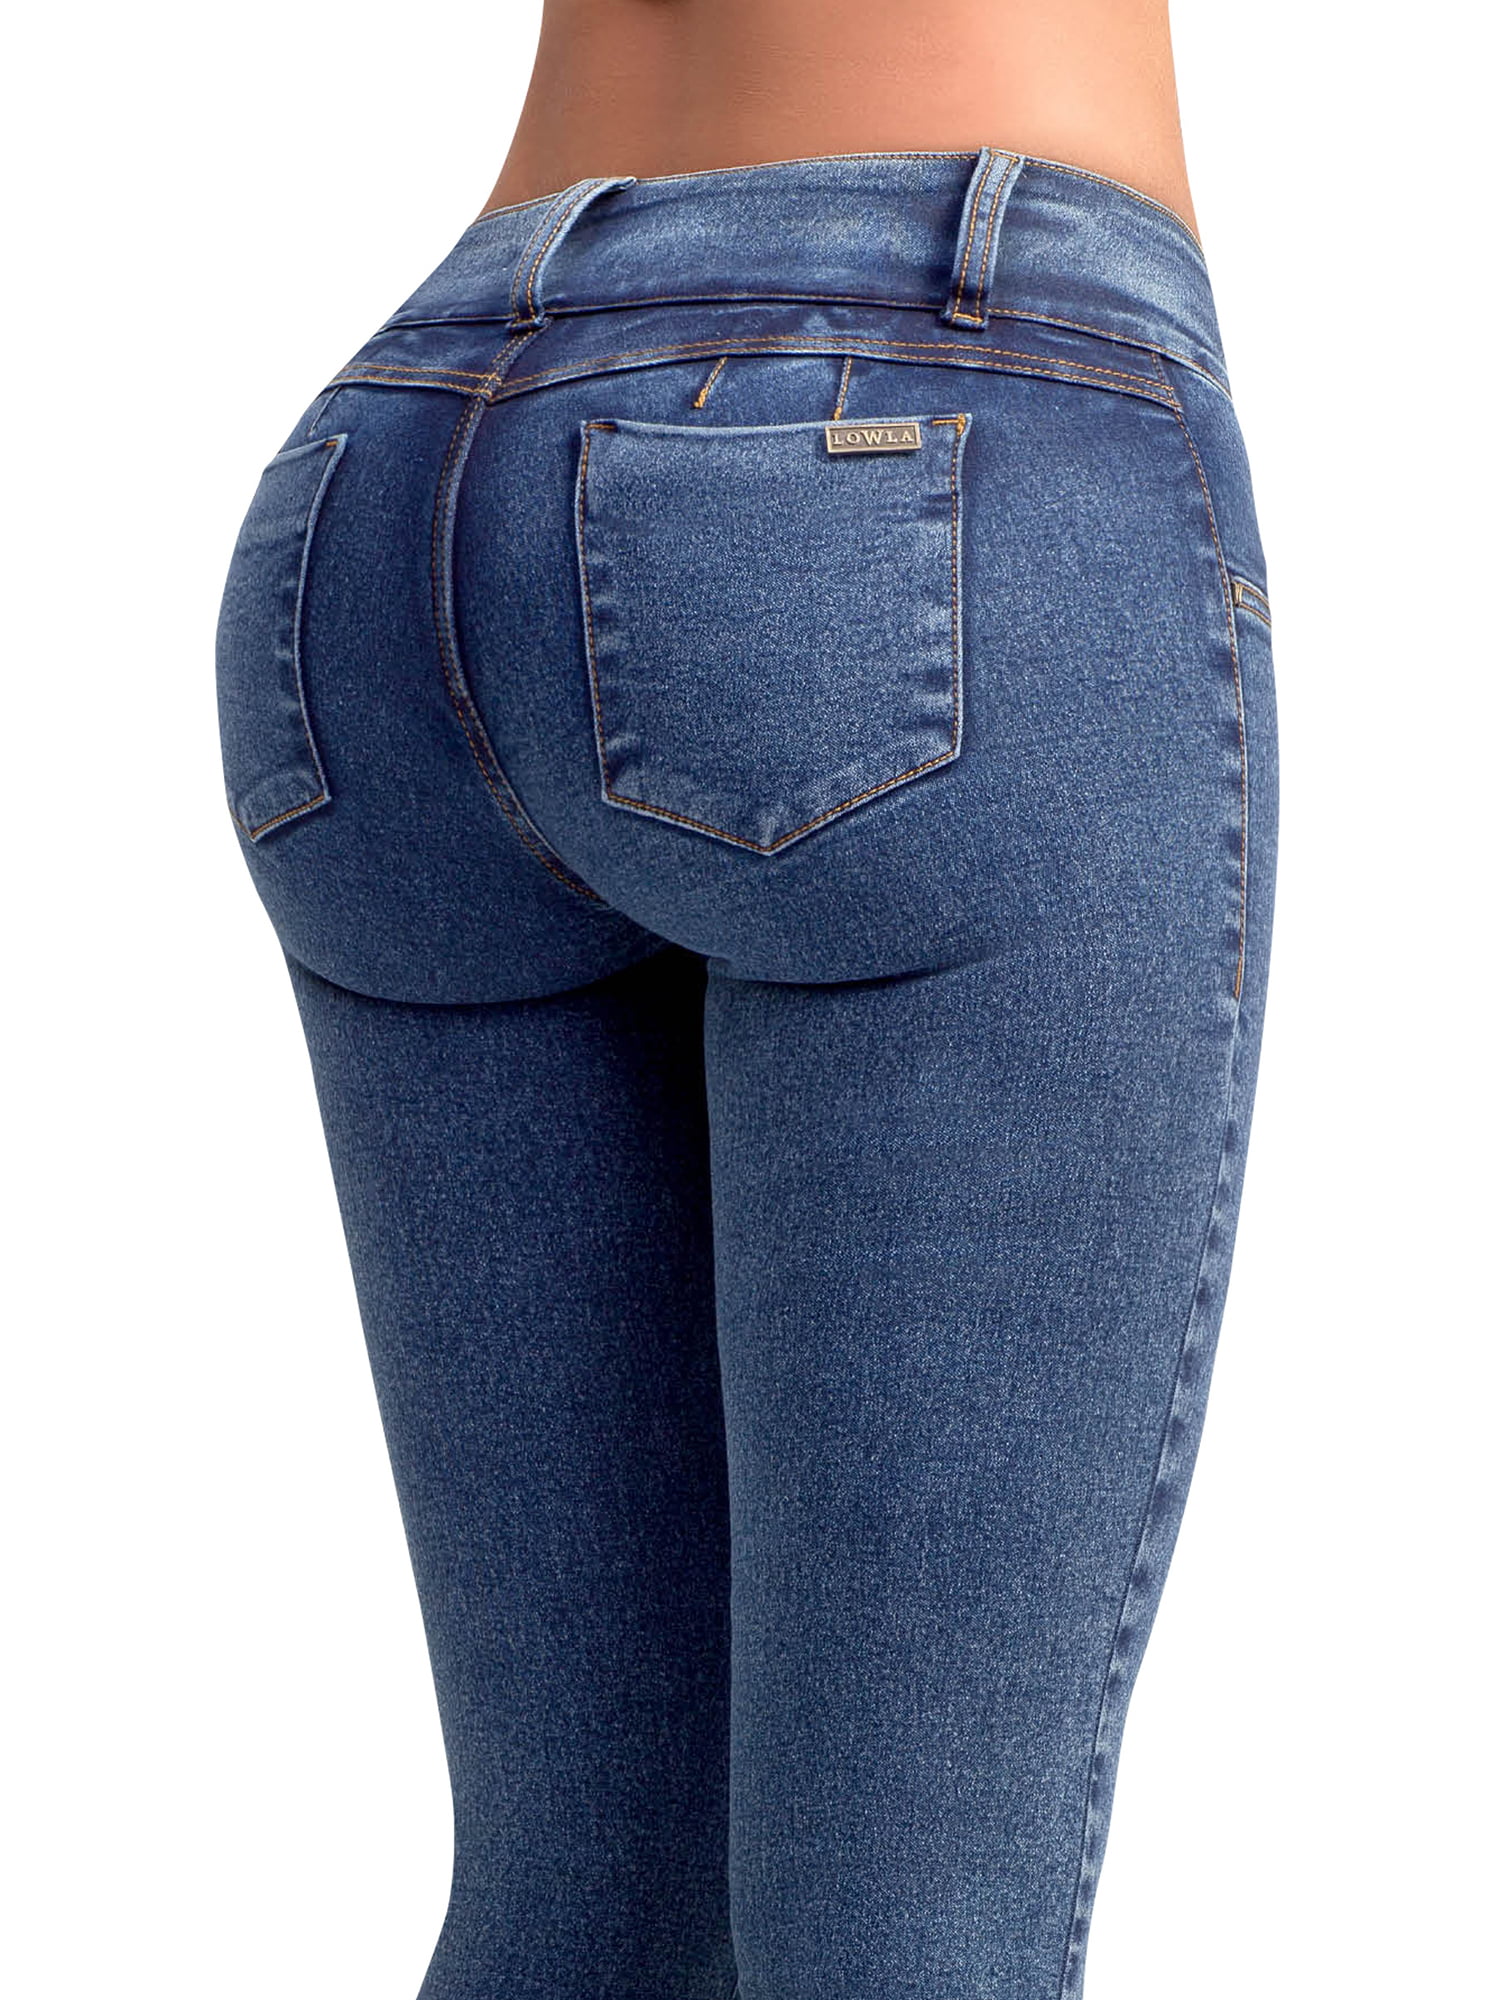 Lowla - Lowla JE217988 Butt Lifting Skinny Jeans With Removable Pads | Jeans Colombianos - Walmart.com - Walmart.com